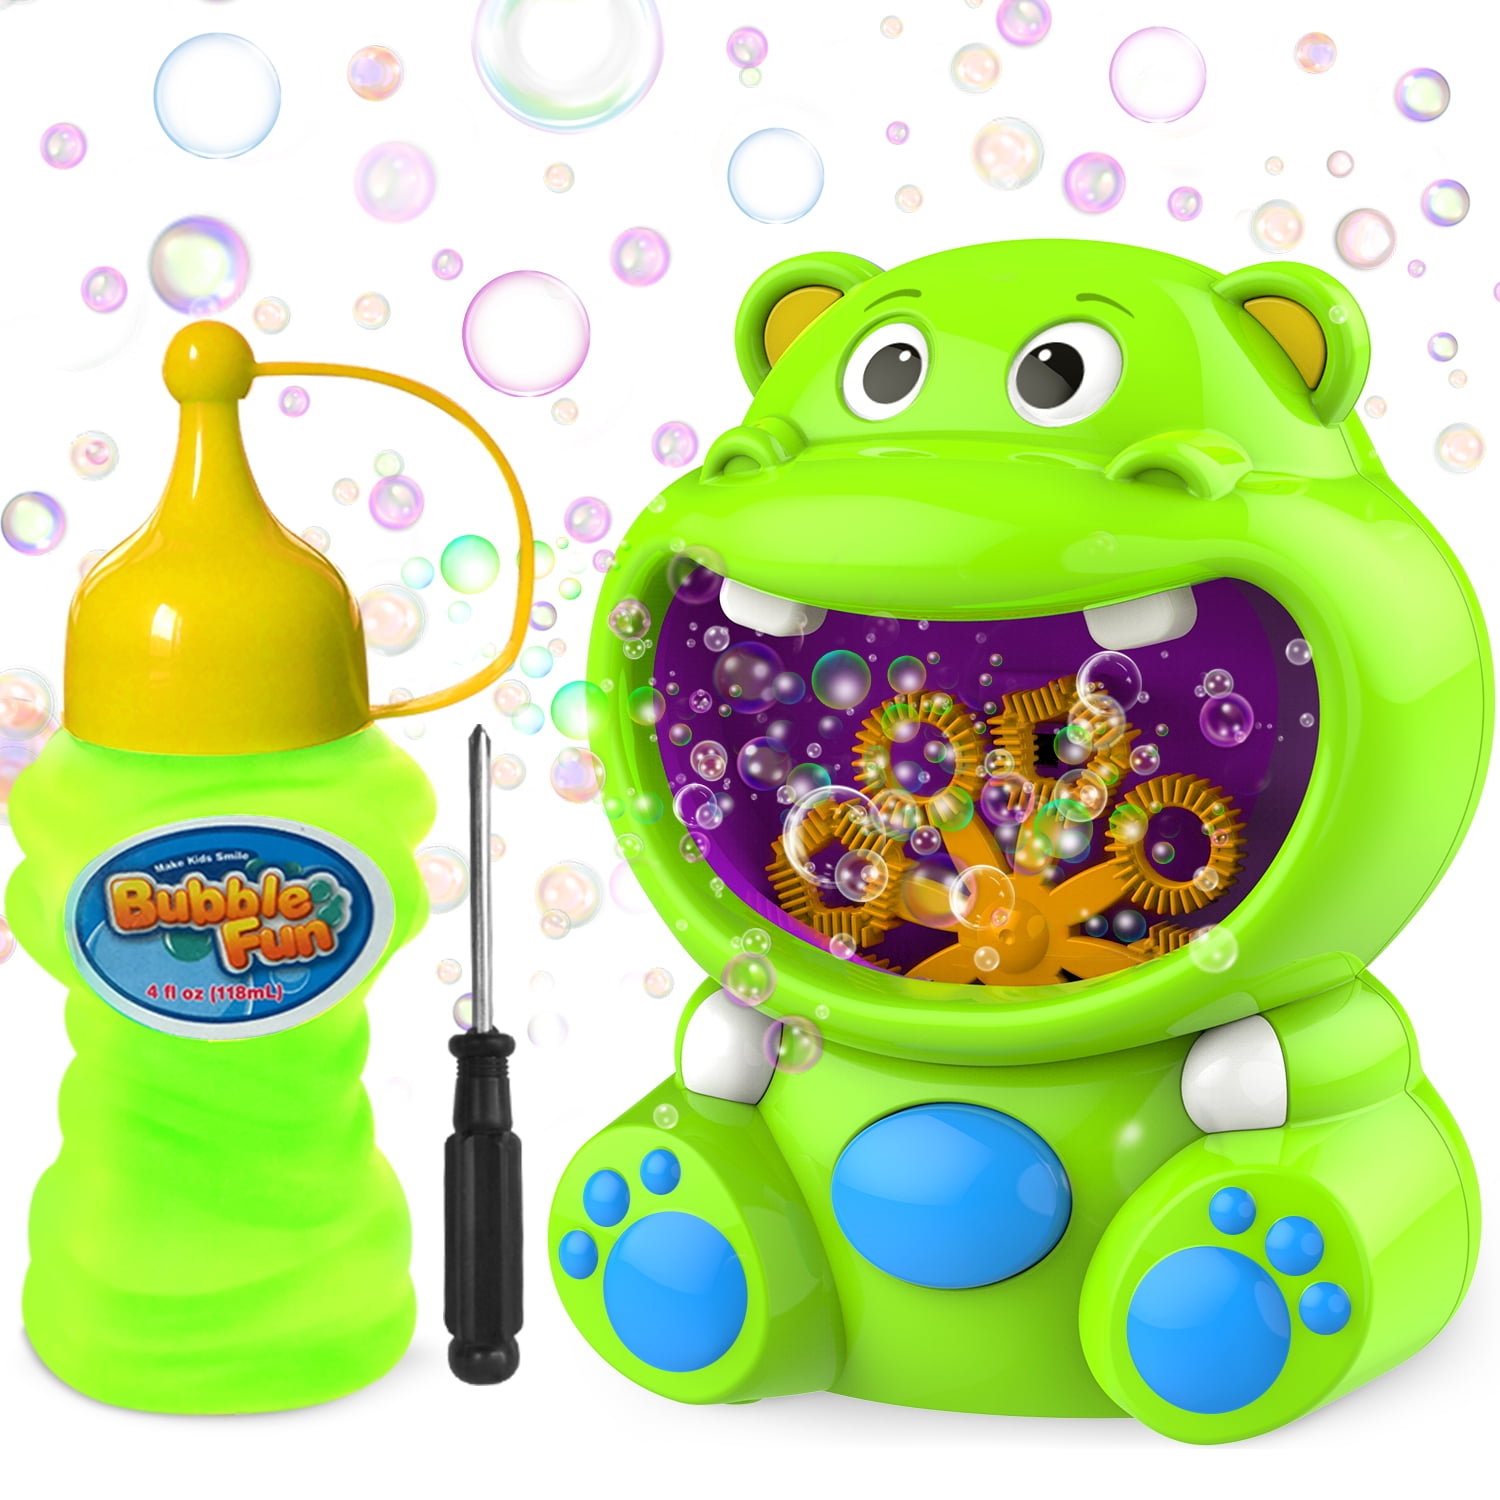 WisToyz Bubble Machine Automatic Bubble Blower 500 Indoor Outdoor Bubble Machine for Kids Baby Bath Toys Easy to Use Bubble Maker with 4OZ Bubble Solution 2 AA Batteries Required Bubbles per Minute 